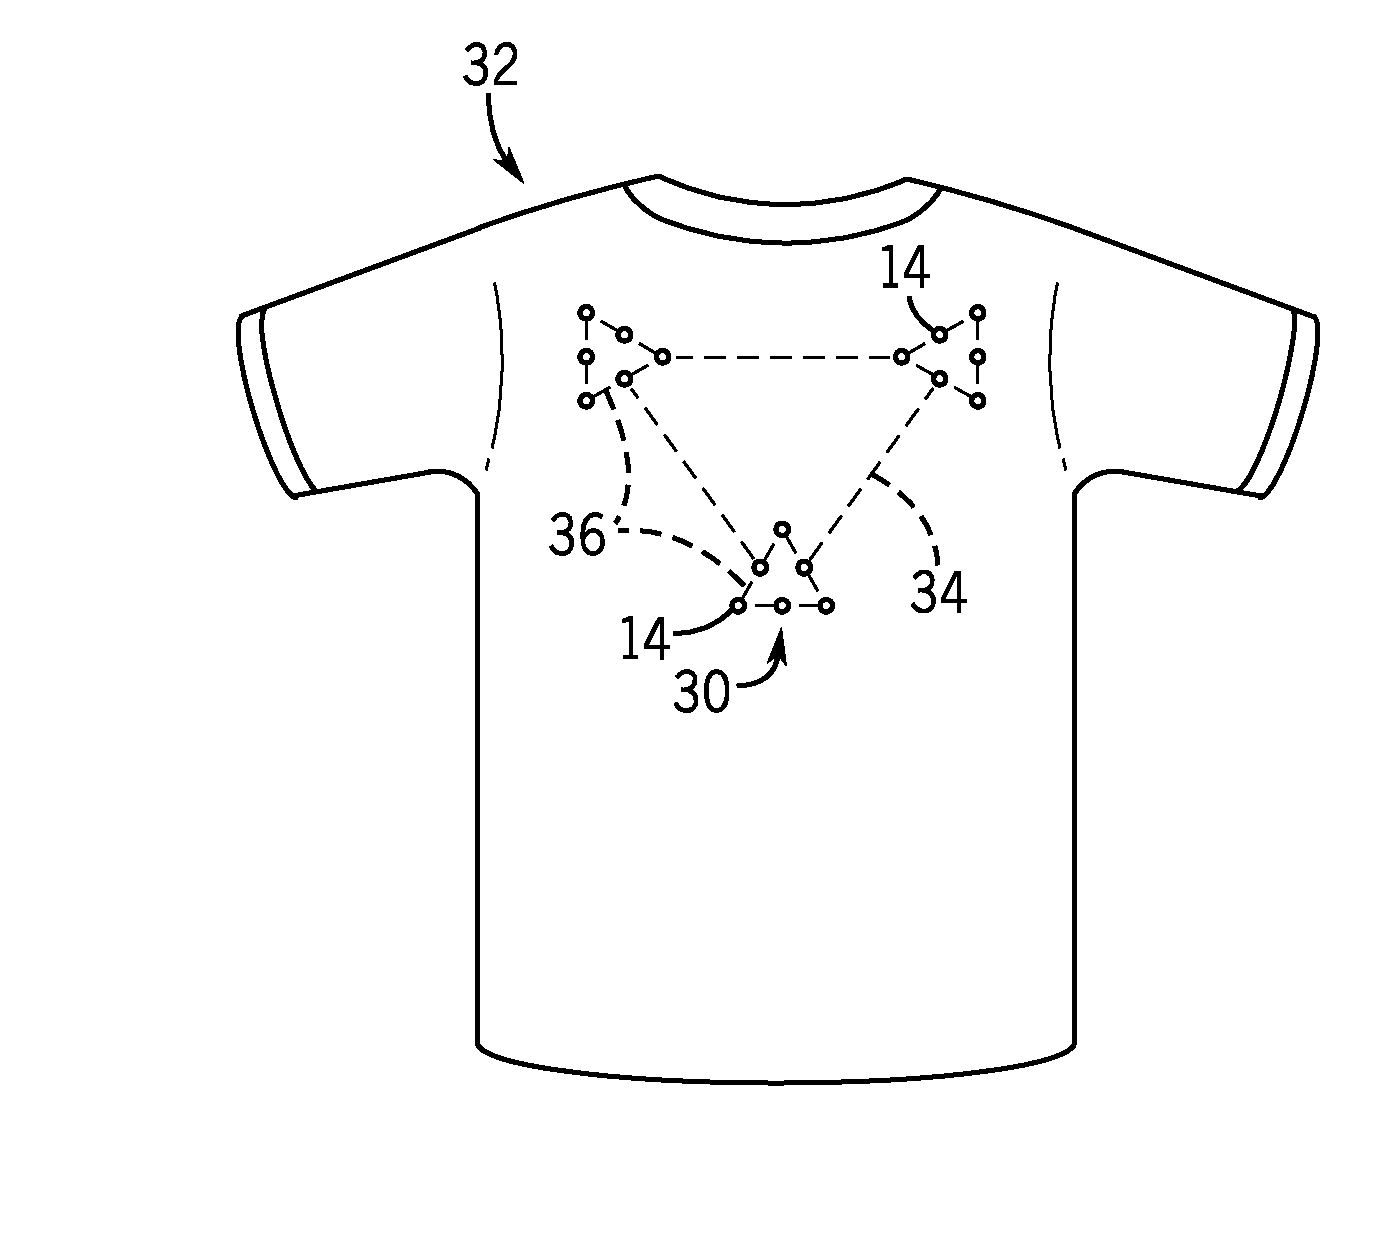 Safety and identification system for garments